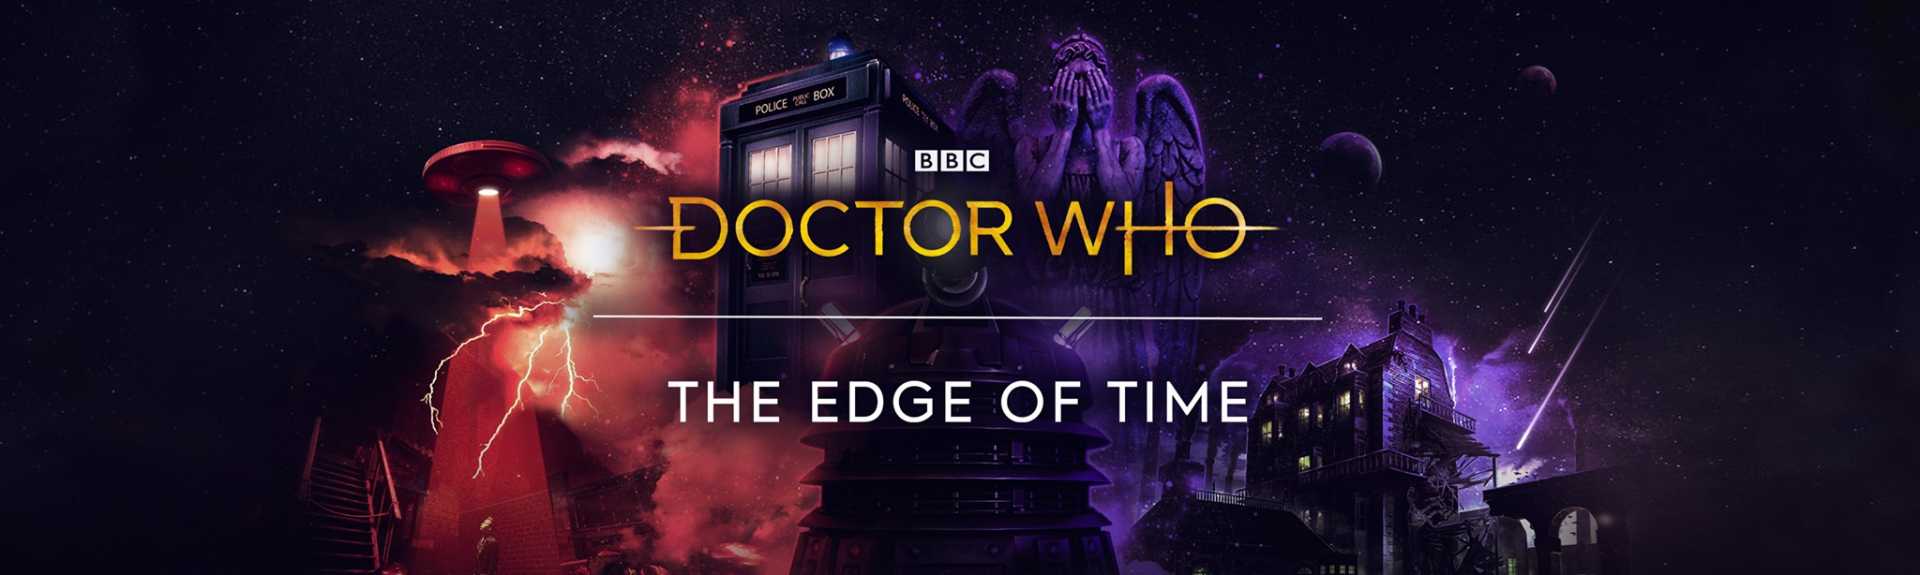 Doctor Who: The Edge of Time: ANÁLISIS